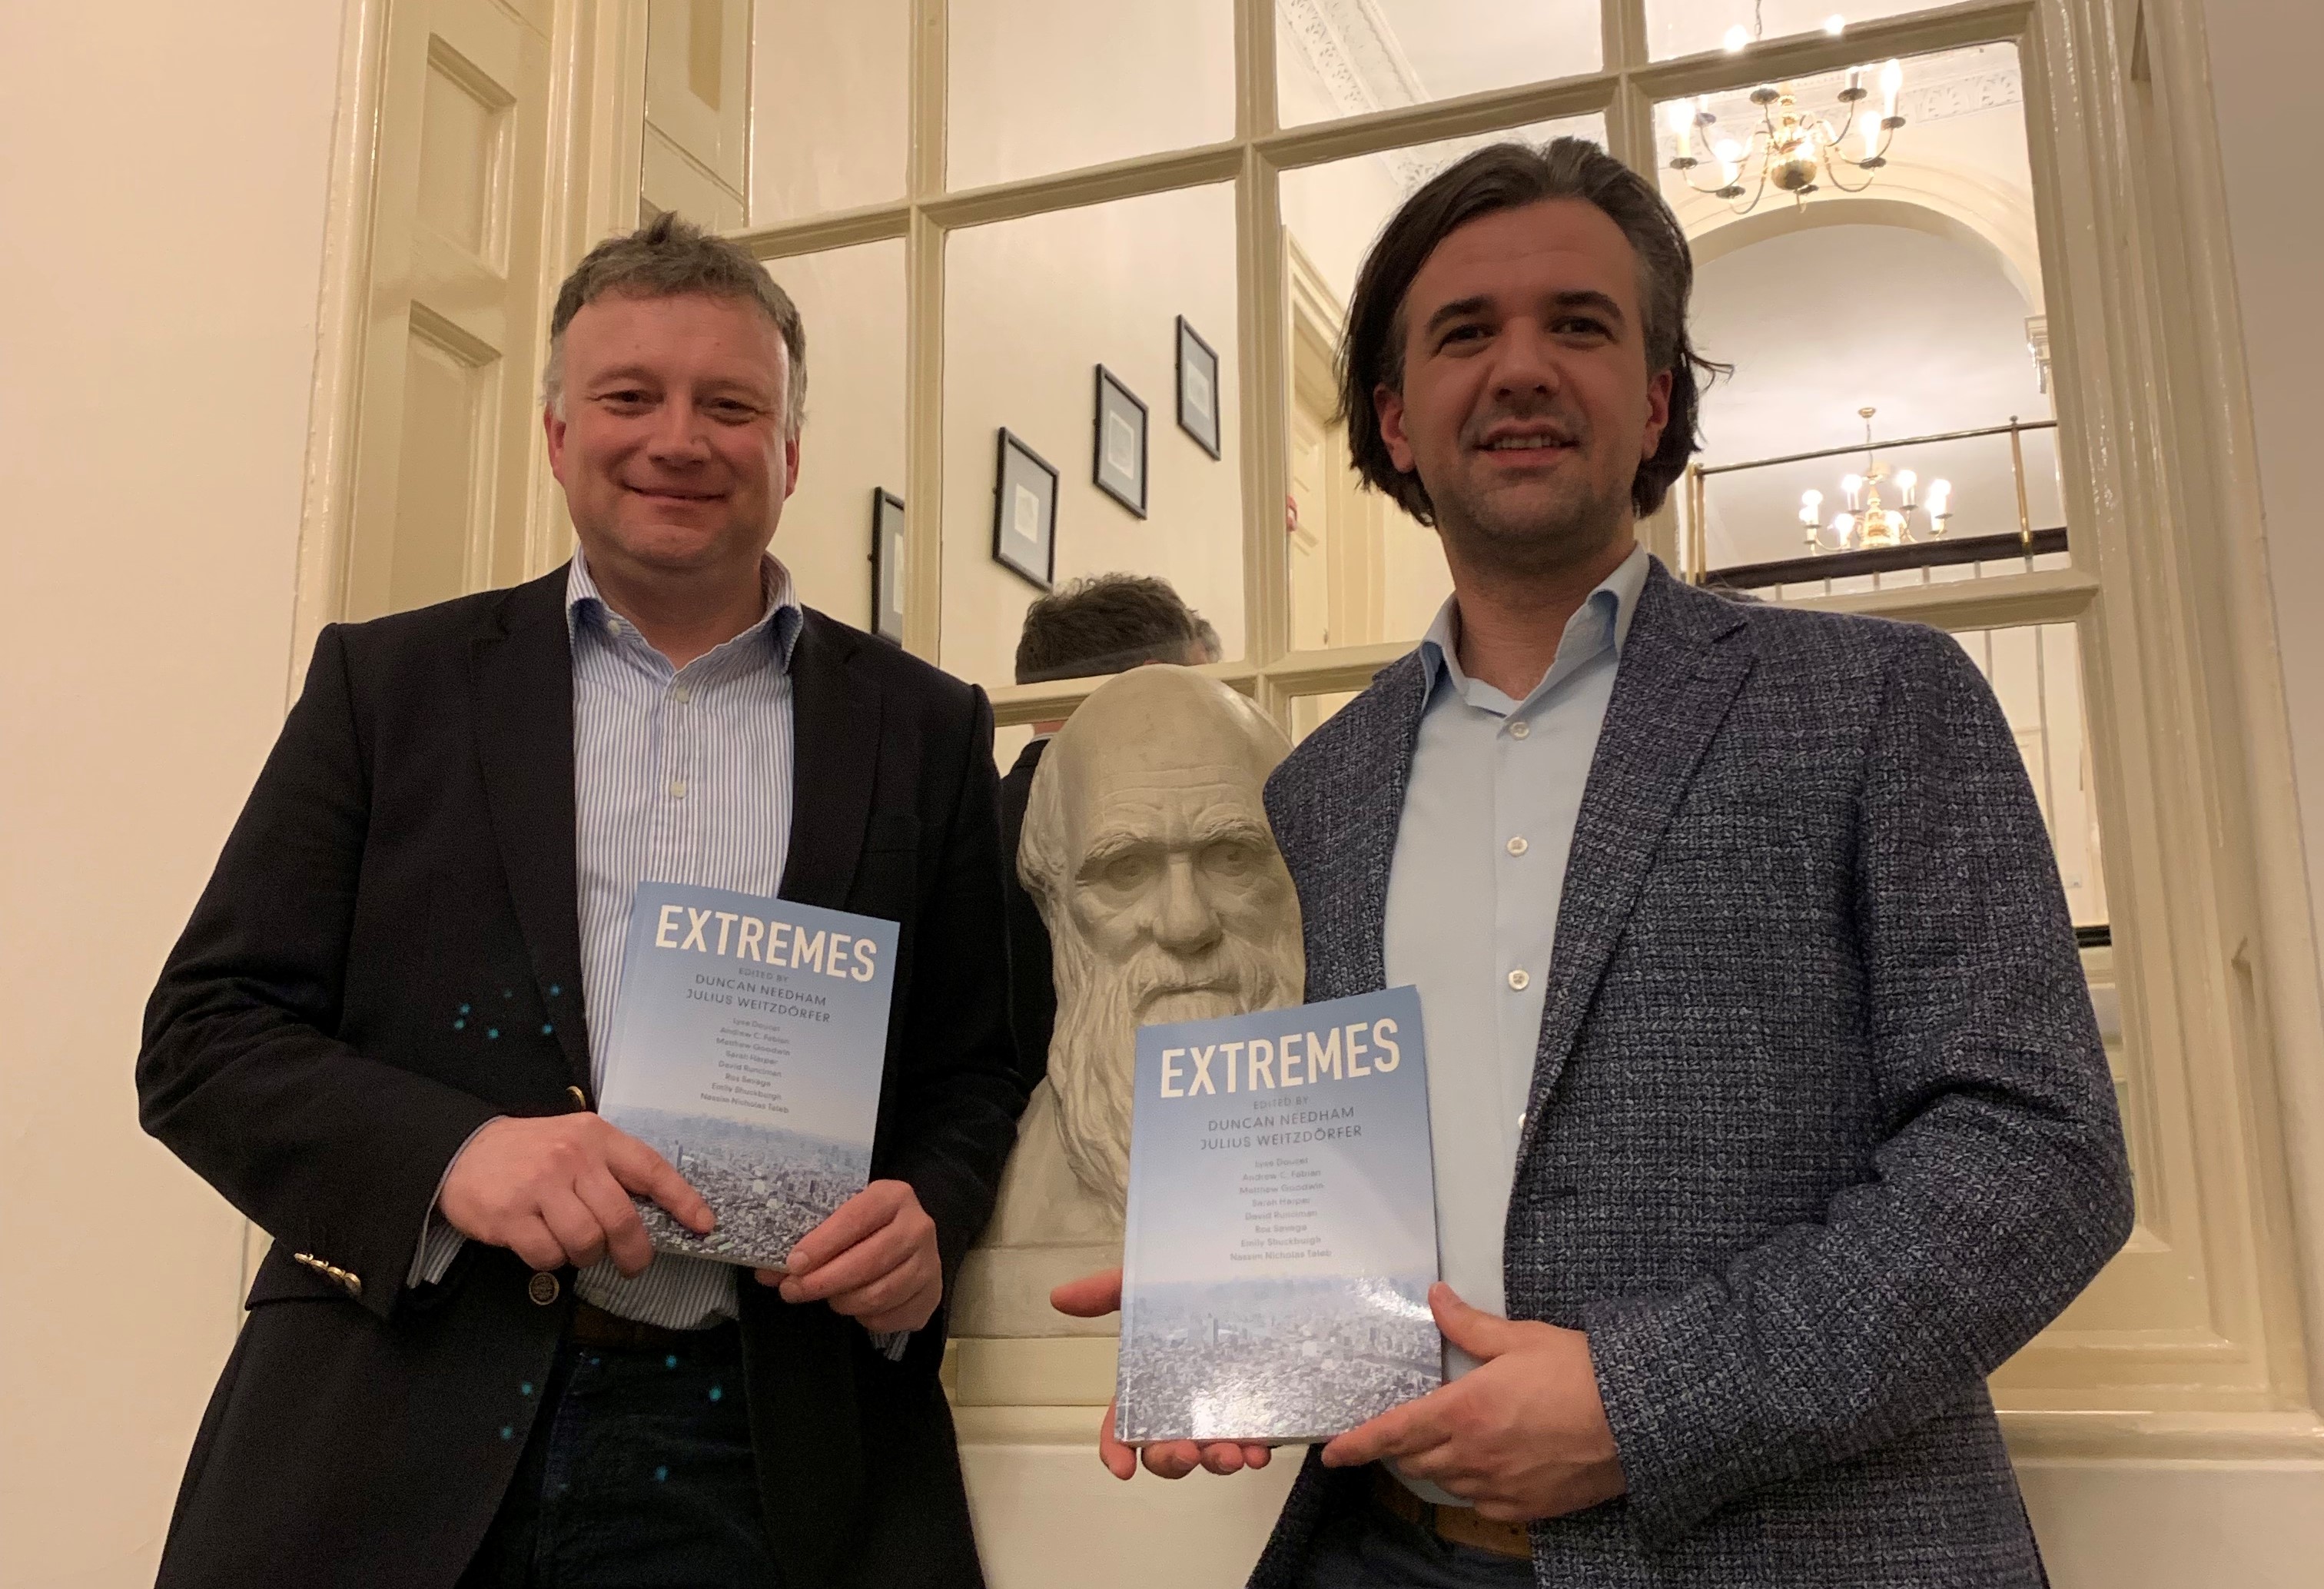 Extremes book launch